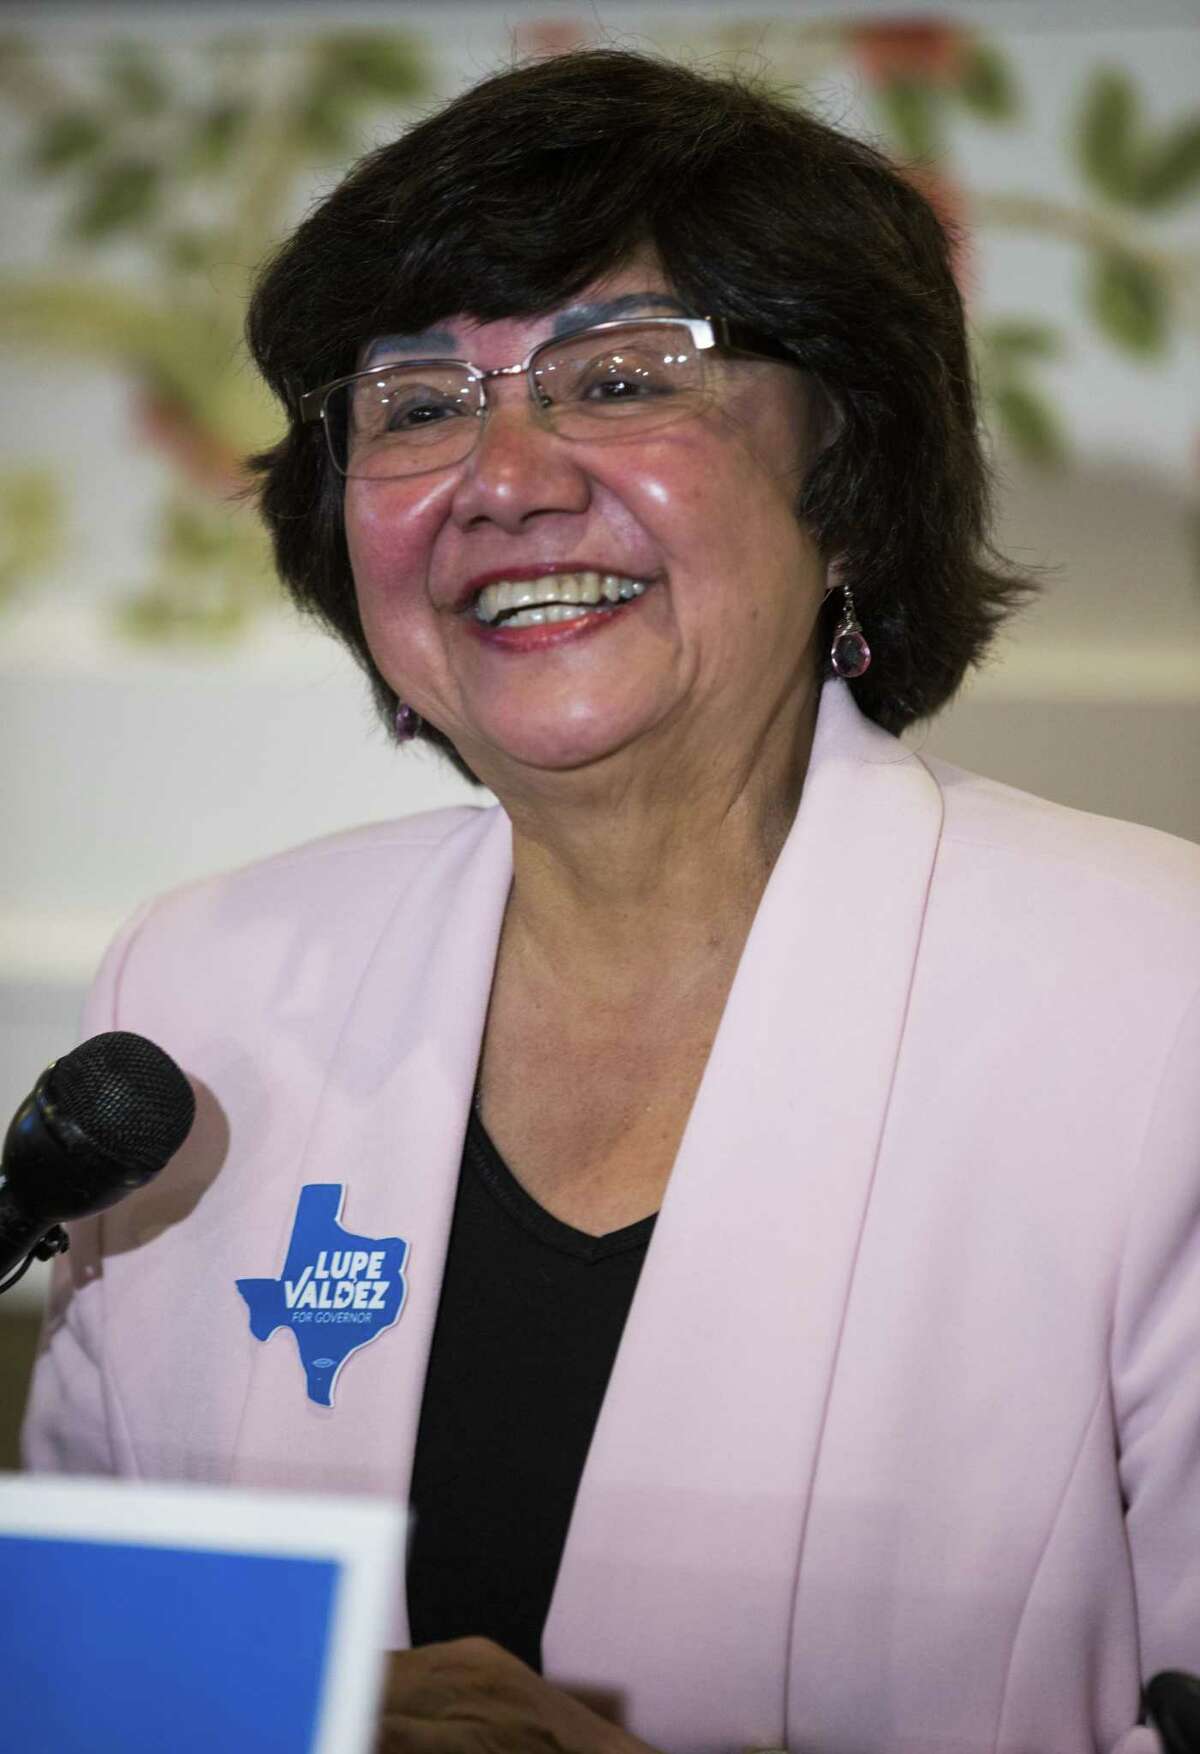 Gubernatorial candidate and former Dallas County Sheriff Lupe Valdez speaks after her runoff win at a democratic party celebration at Ellen's in Dallas on Tuesday, May 22, 2018. Today's primary runoff election will decide whether Valdez or Andrew White will be the democratic candidate for Texas governor on the ballot in November. (Ashley Landis/The Dallas Morning News)